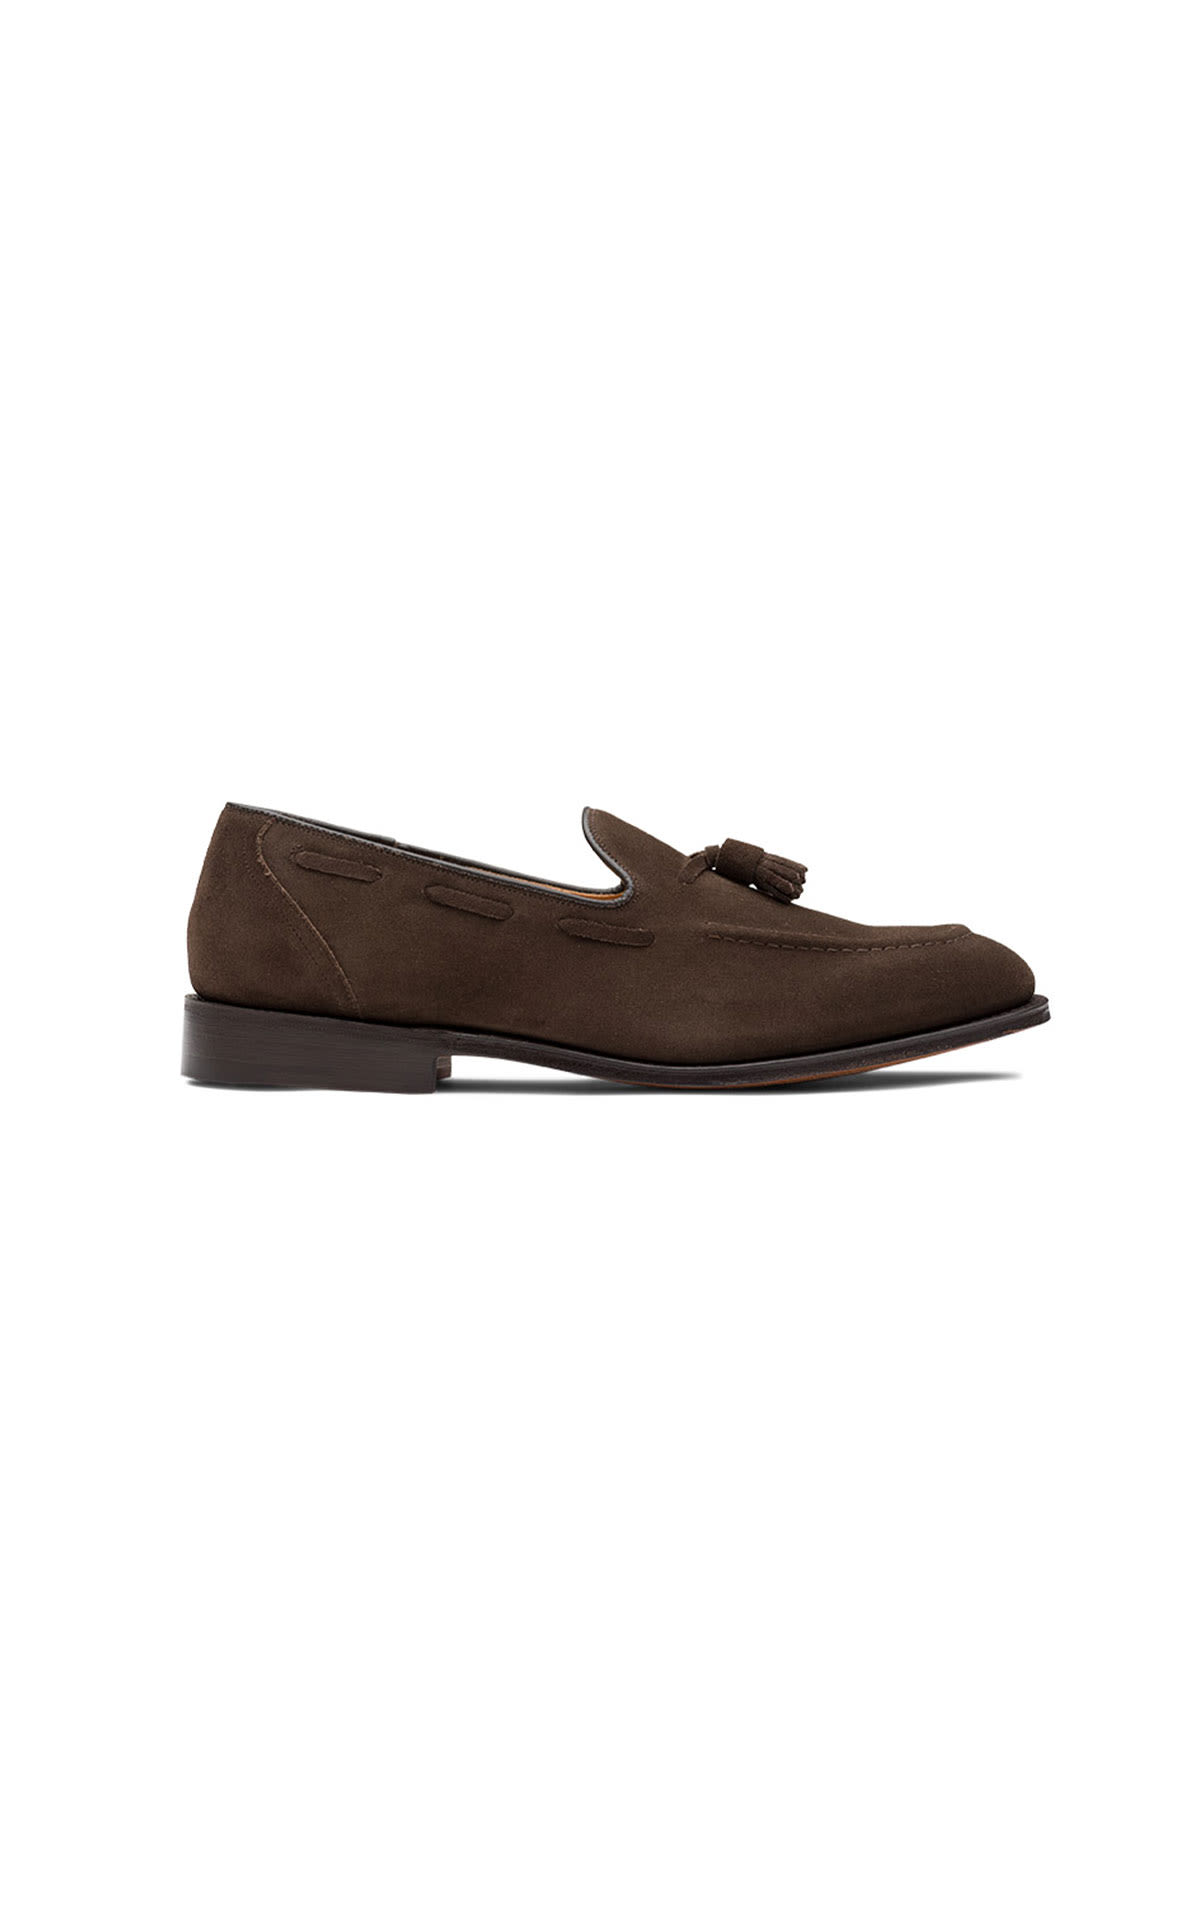 Church's Kingsley suede brown from Bicester Village